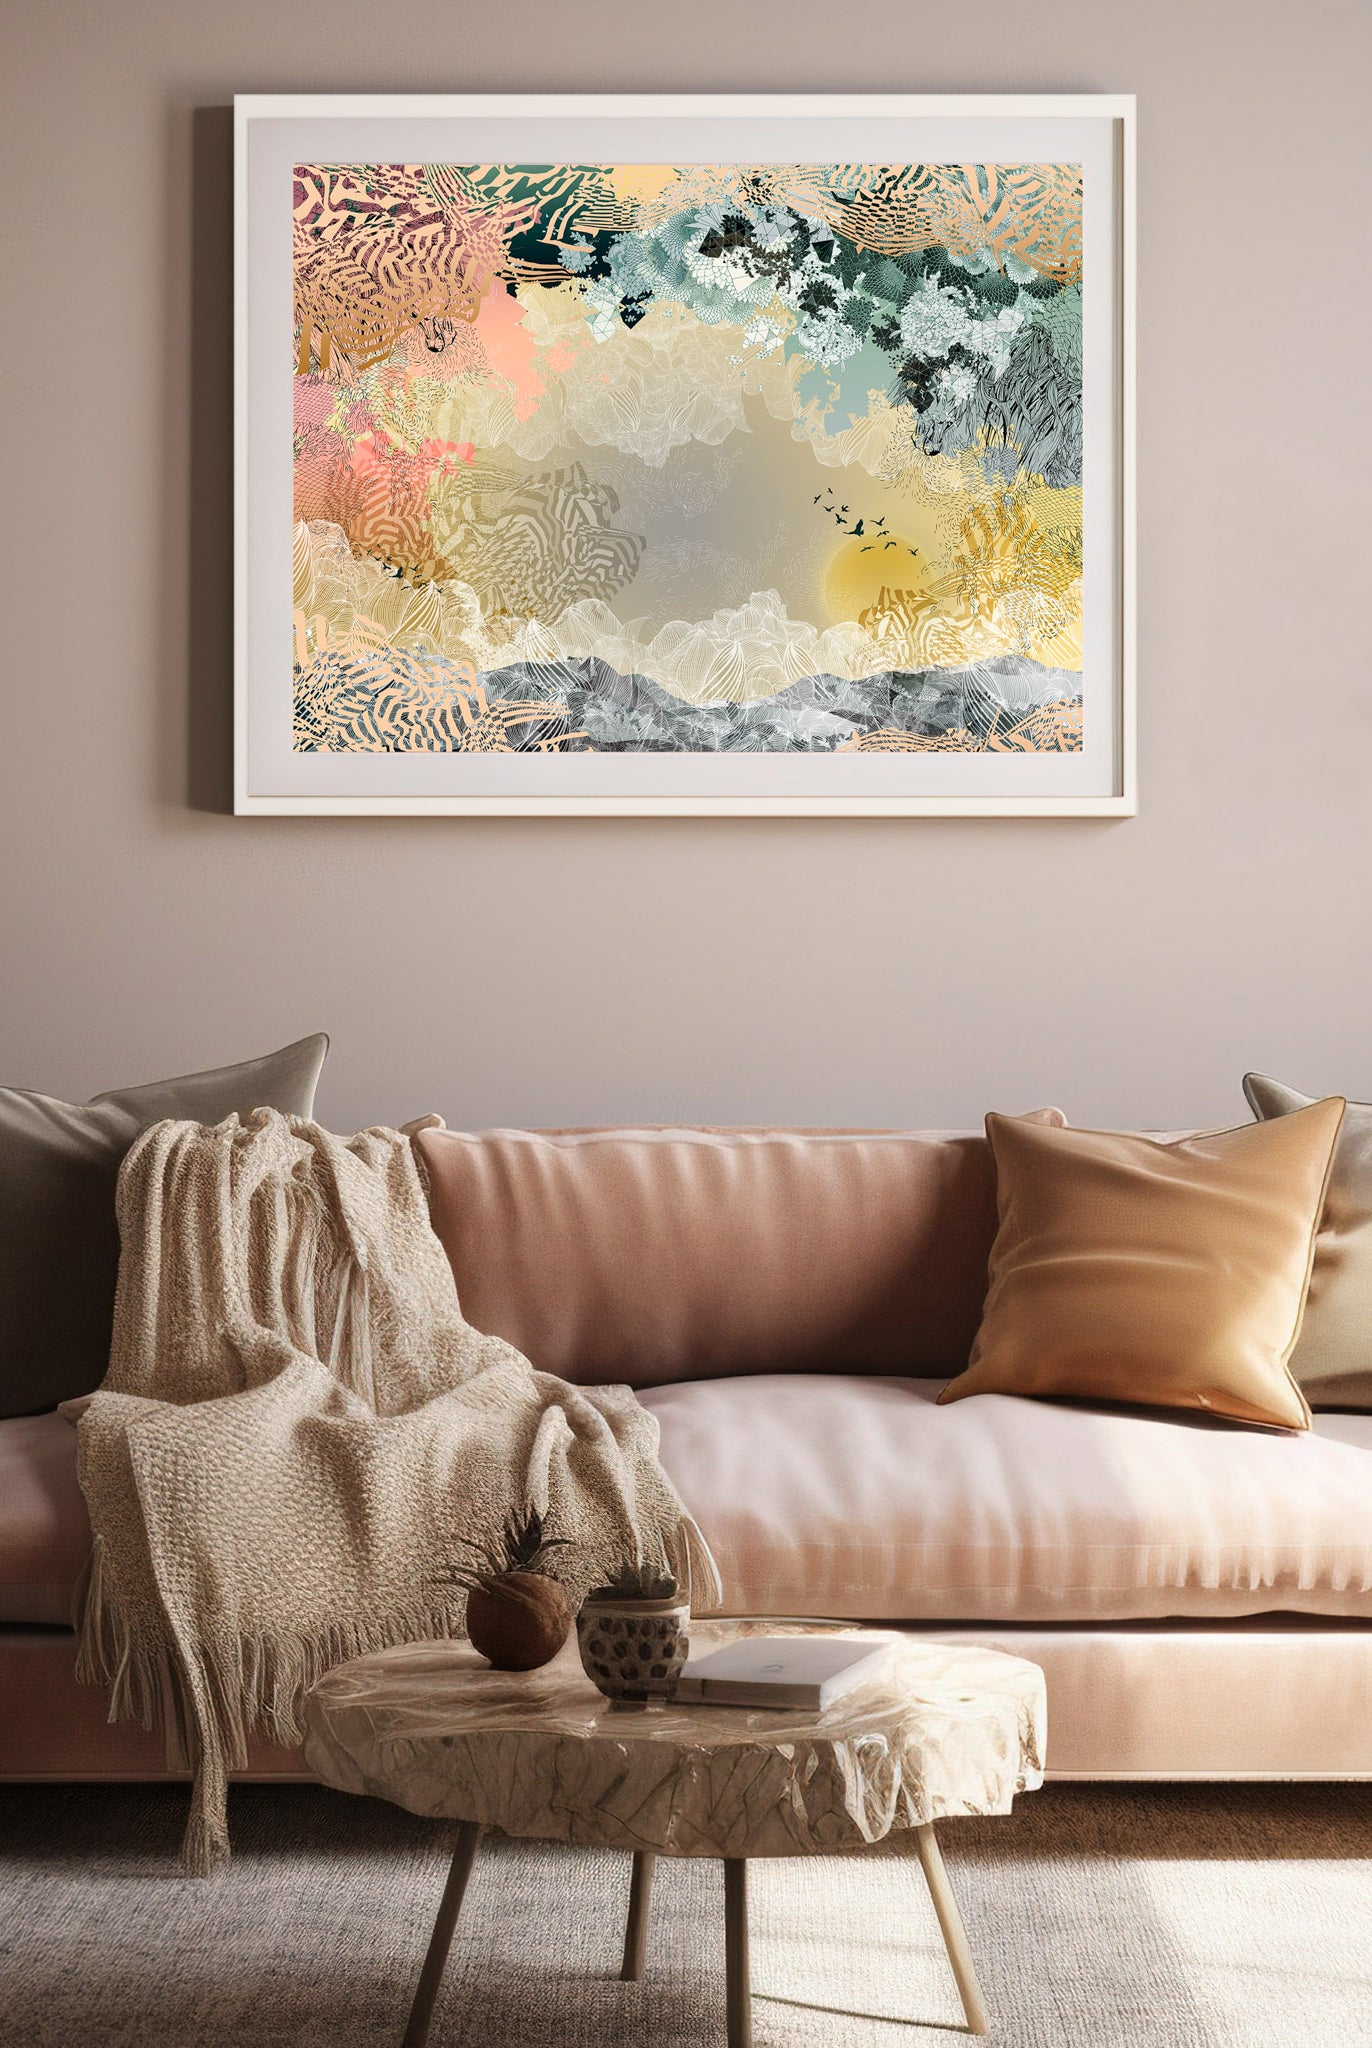 A mock up of a Giclee print in a white frame in front of a pink sofa